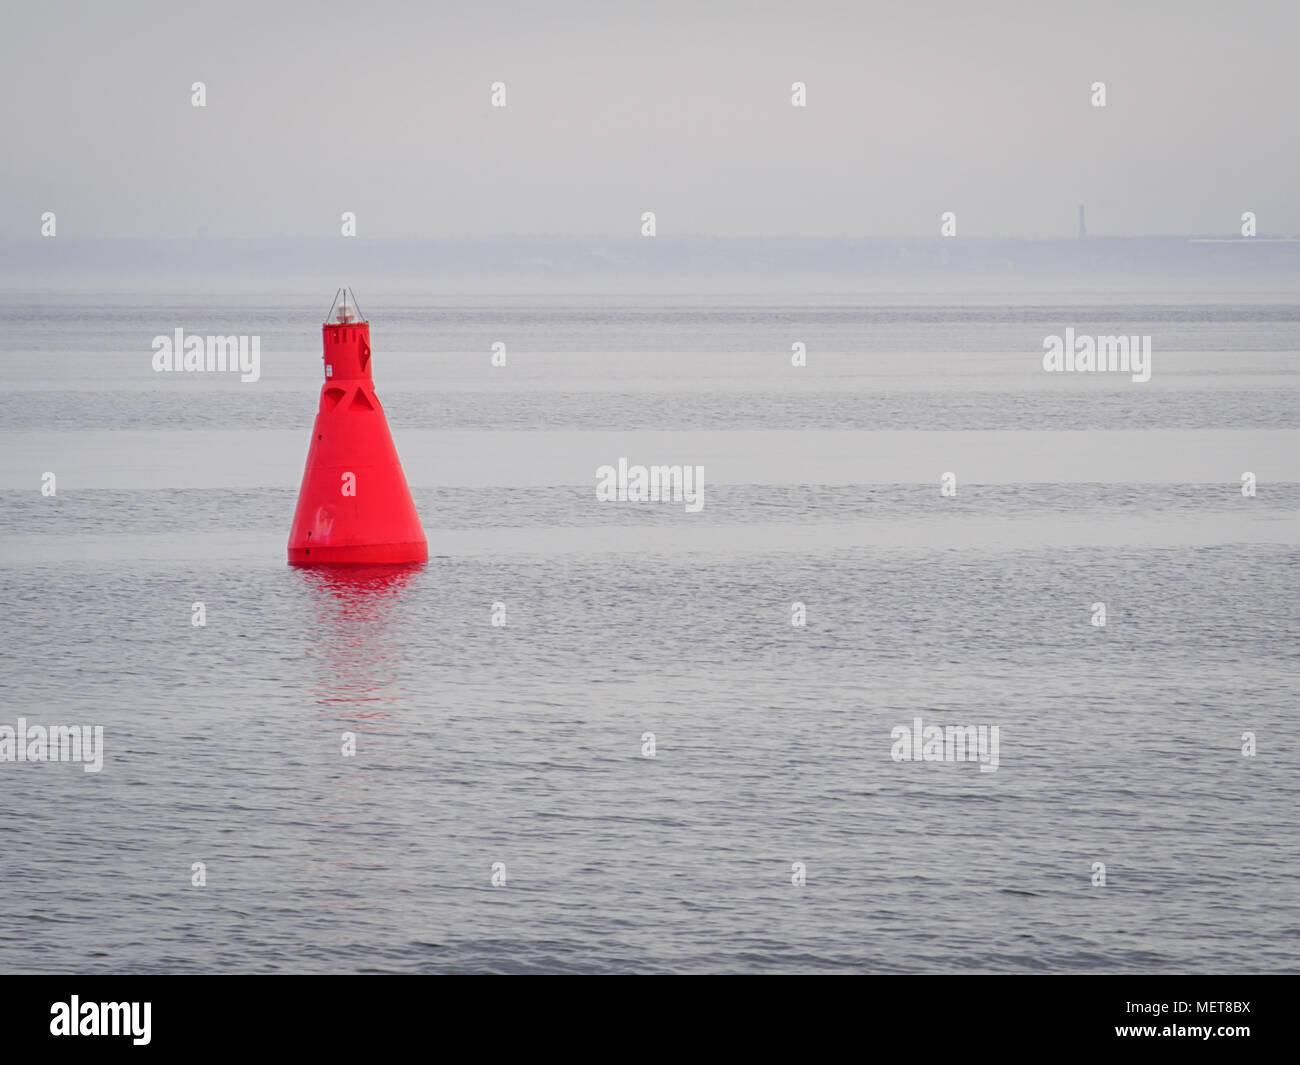 Red buoy as a navigation mark in the calm sea Stock Photo